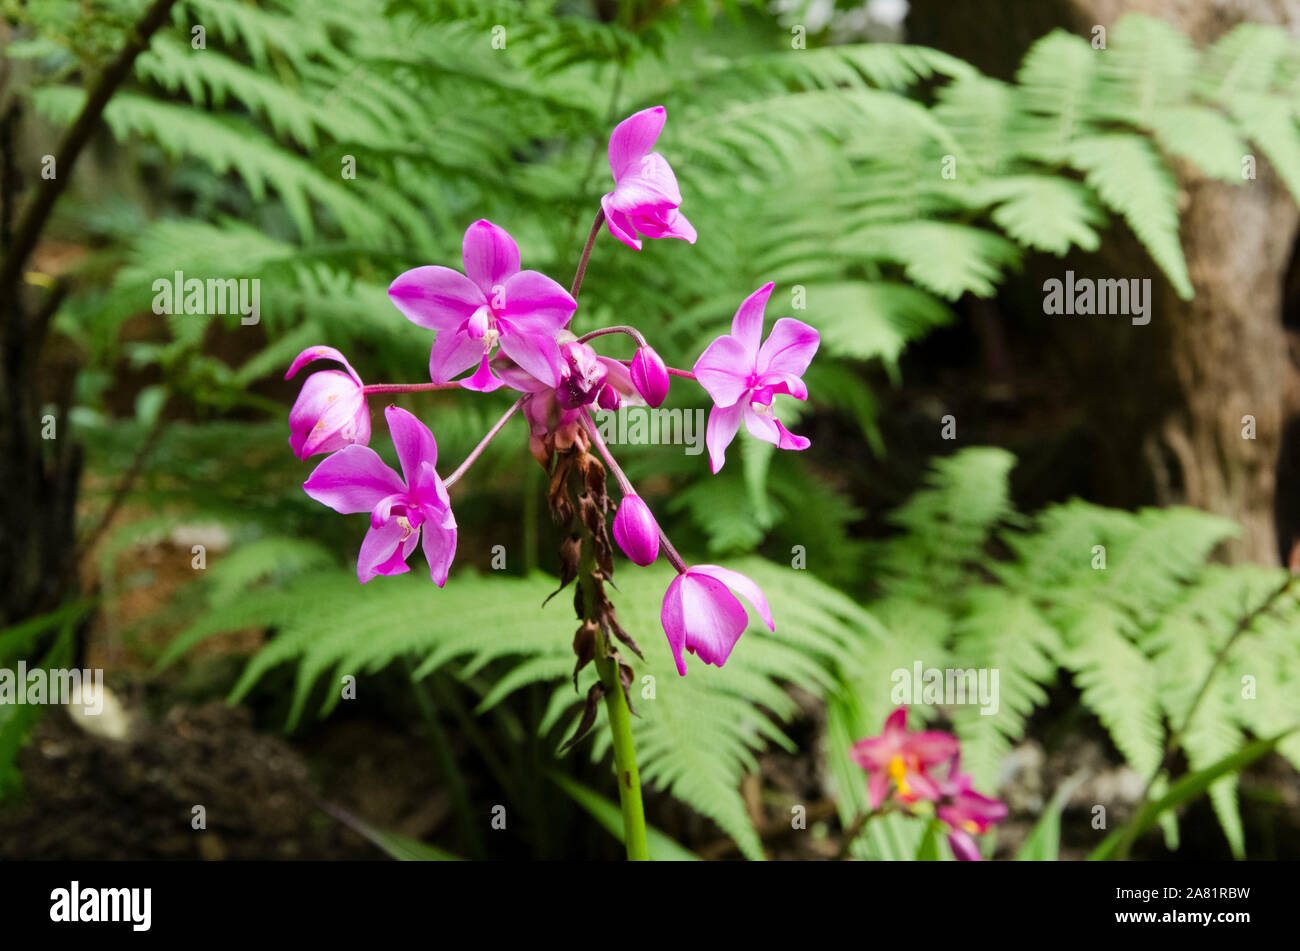 Spathoglottis Plicata orchid, a beautiful and vivid tropical flower, in a natural environment Stock Photo